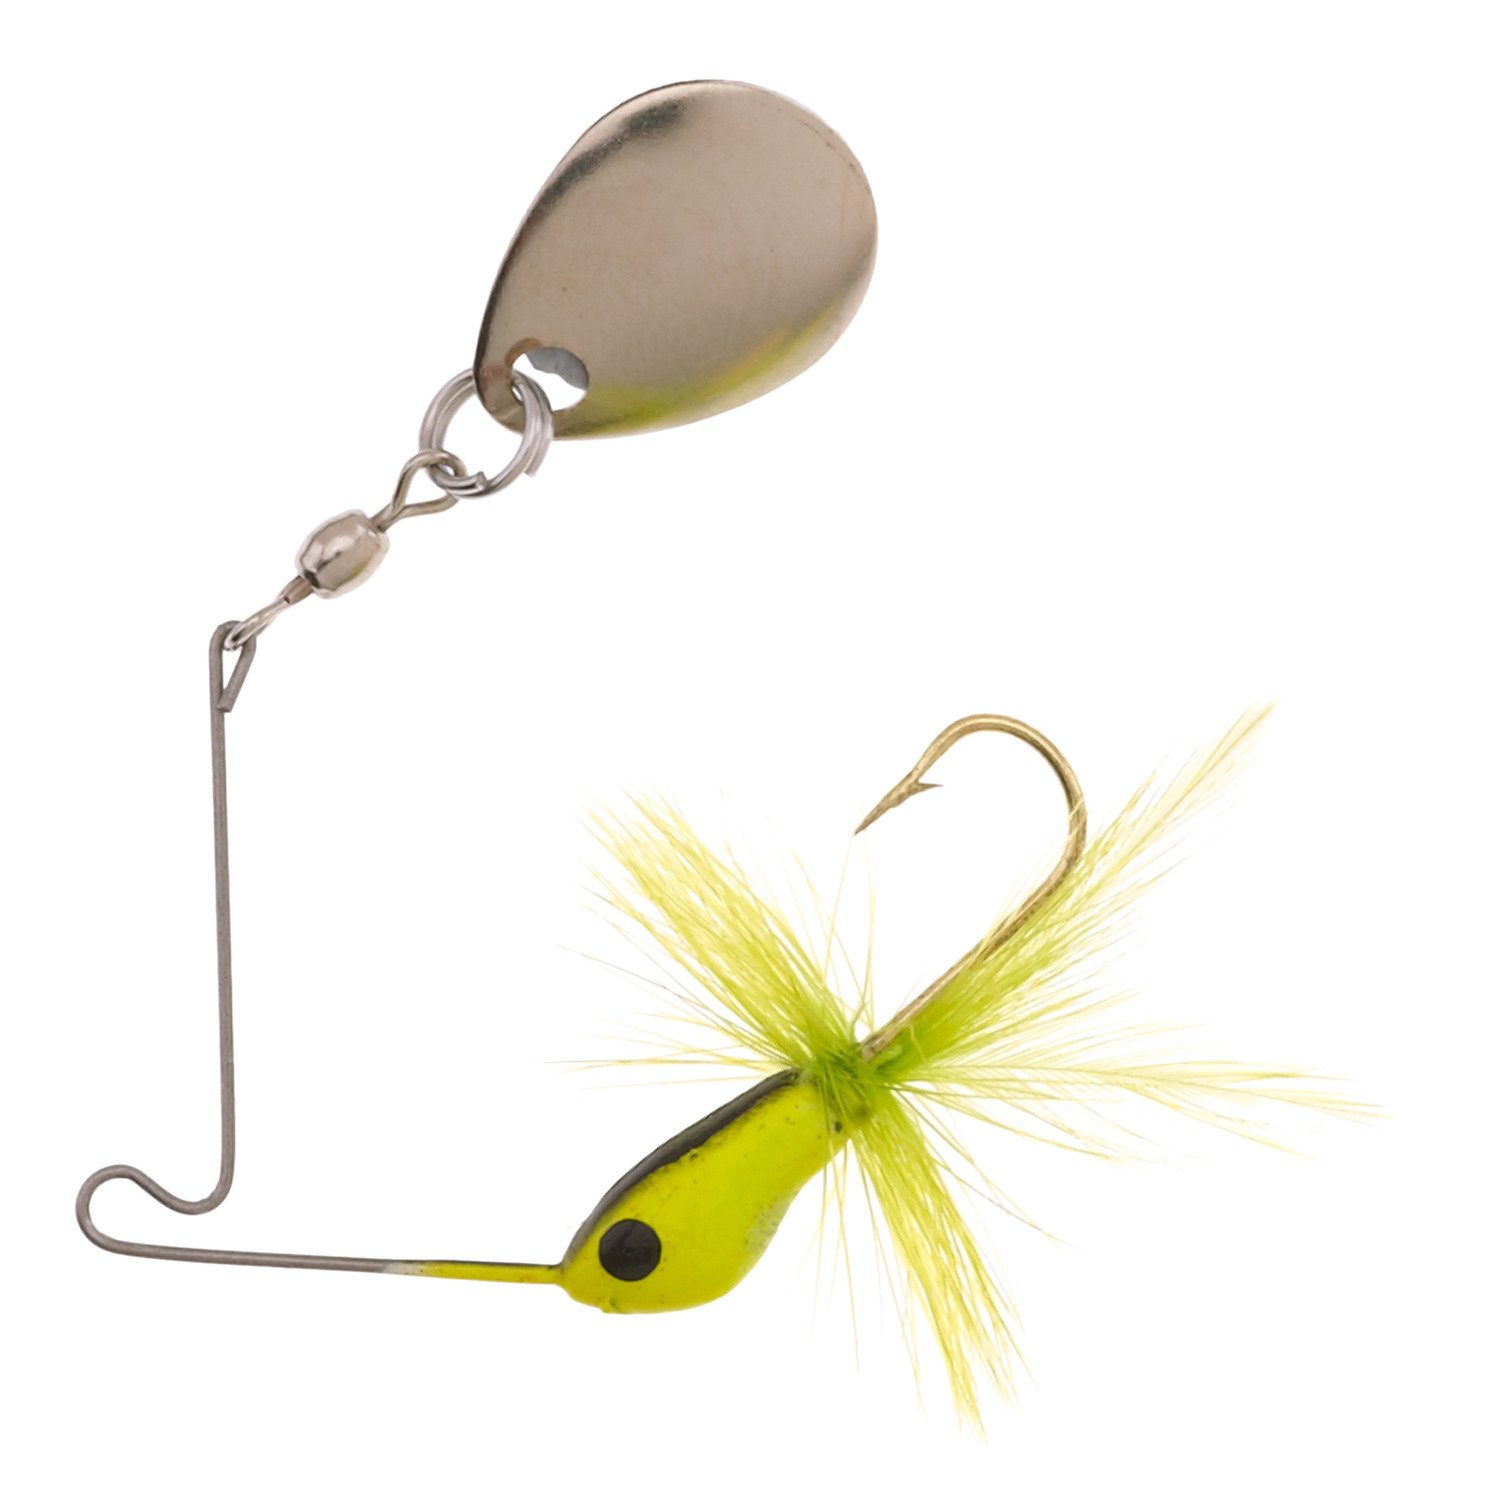 H&H Cutie Spin Spinno Lure - 1/16oz Yellow